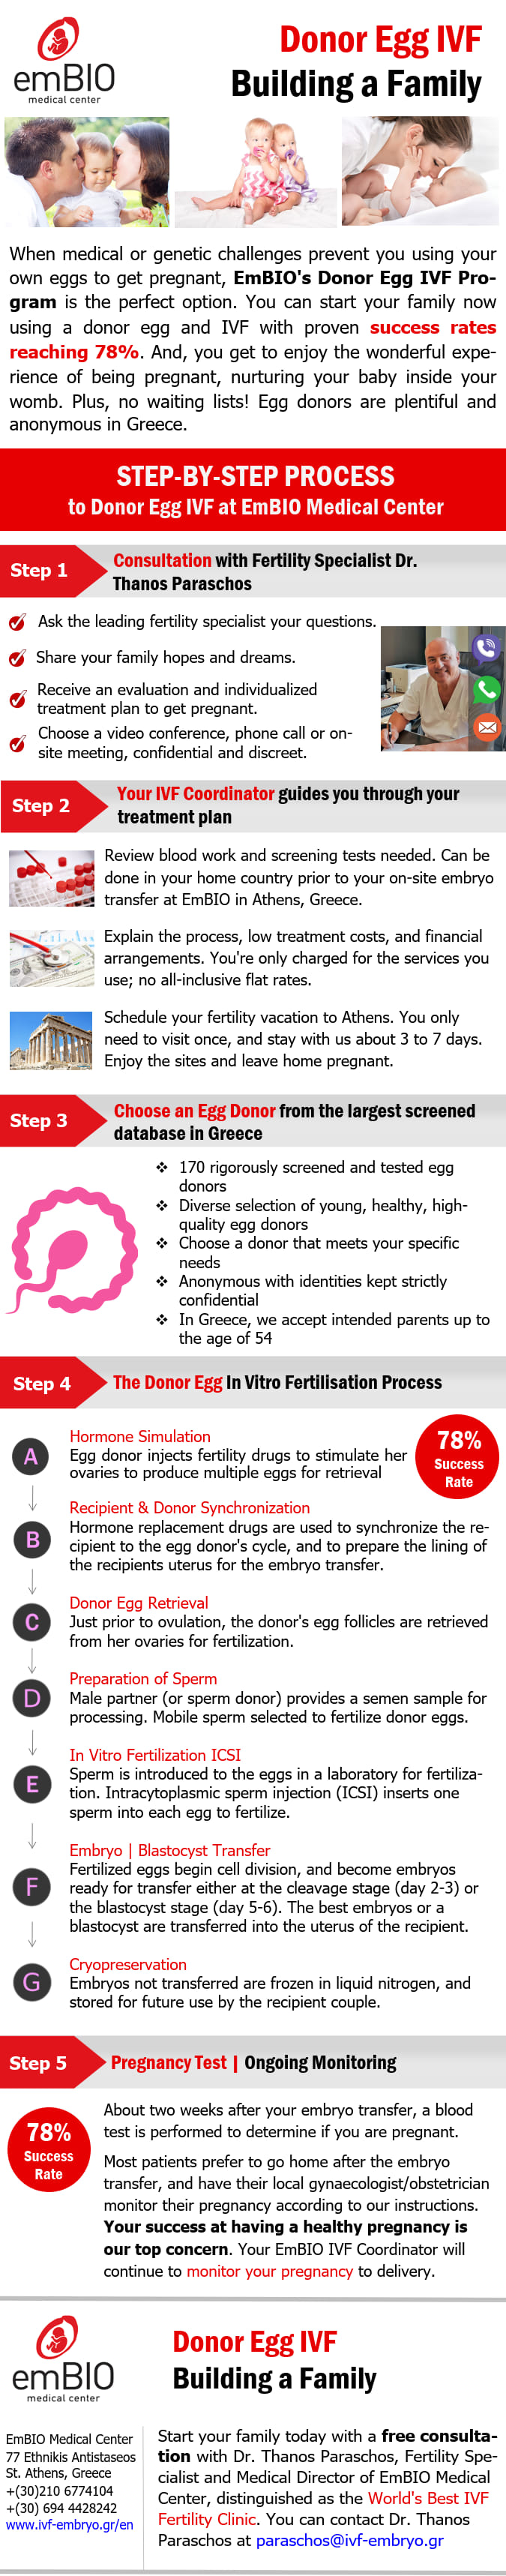 infographic for egg donation in Greece at EmBIO clinic in Athens